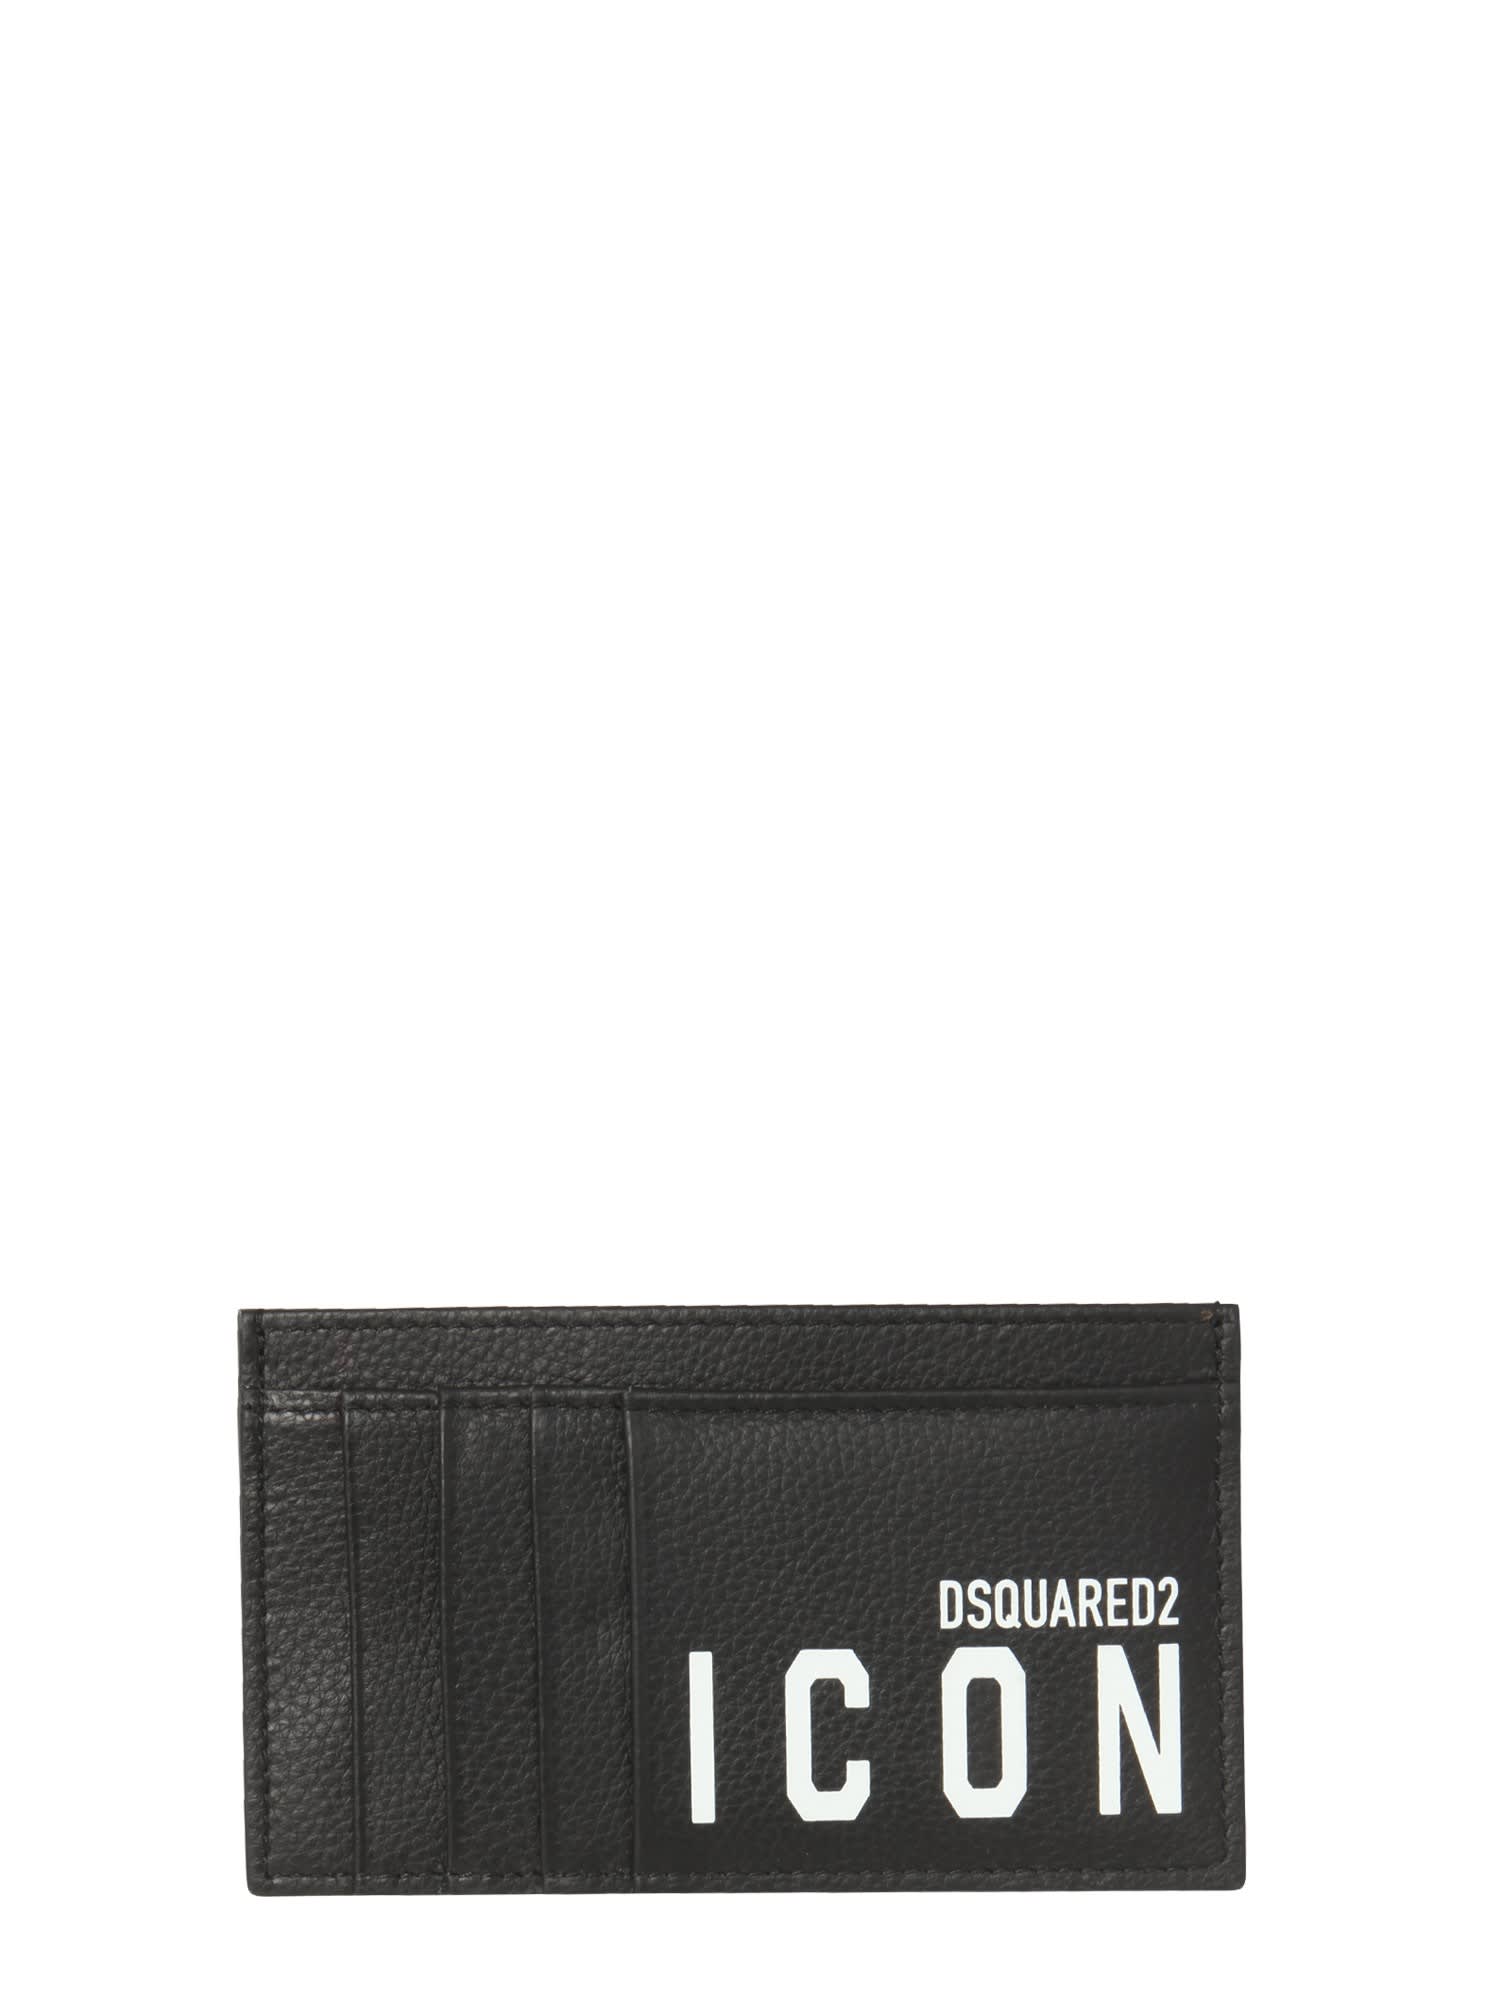 DSQUARED2 ICON CARD HOLDER,CCW0006 25103905M063